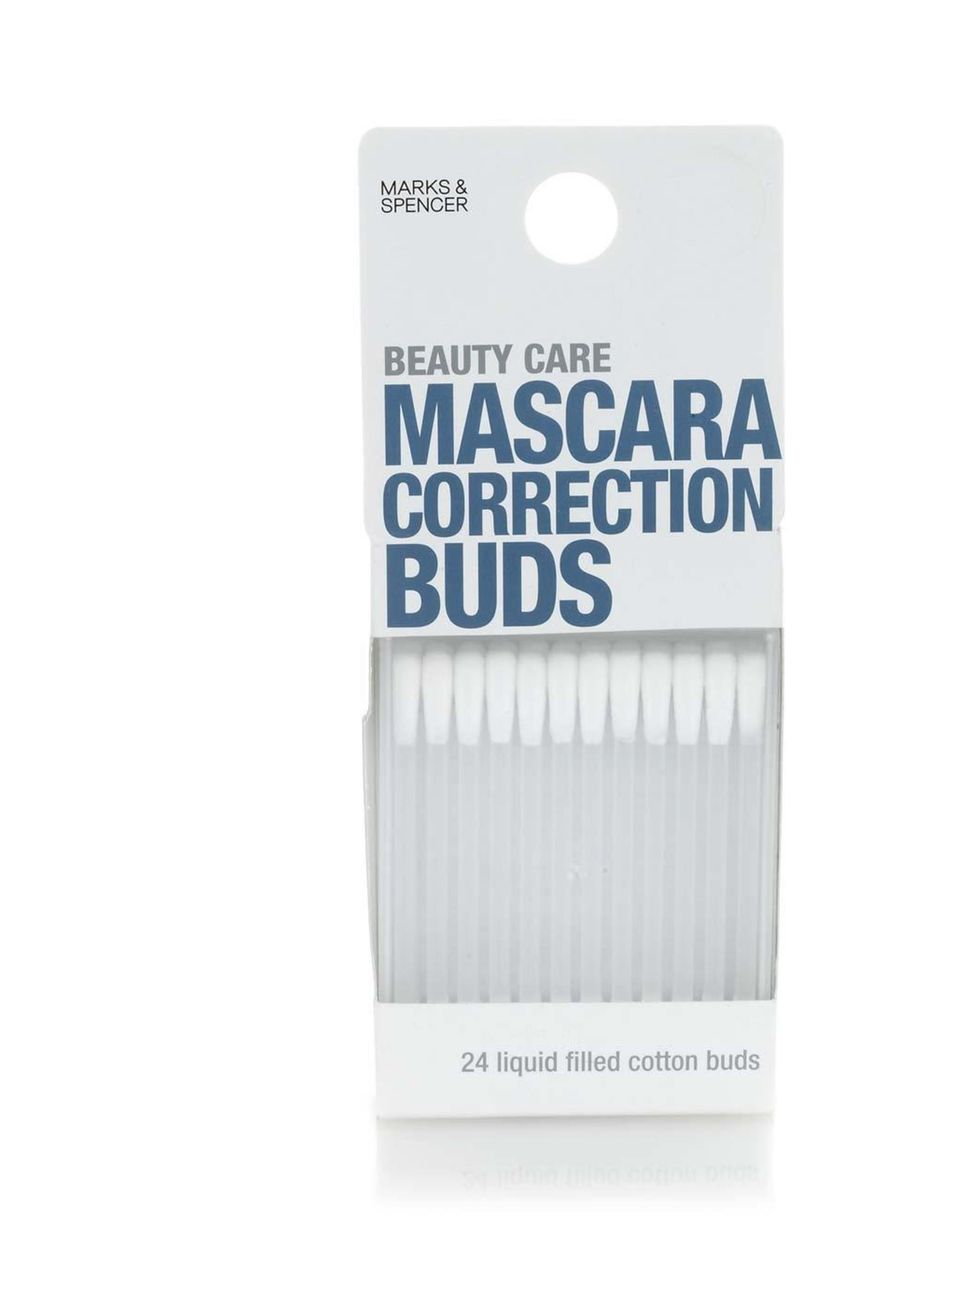 <p>The quick-fix</p>

<p><a href="http://www.marksandspencer.com/mascara-correction-buds/p/p21073708" target="_blank">Marks & Spencer Mascara Correction Buds, £3.</a></p>

<p>Instead of wiping away all of your morning layer of mascara and starting again, 